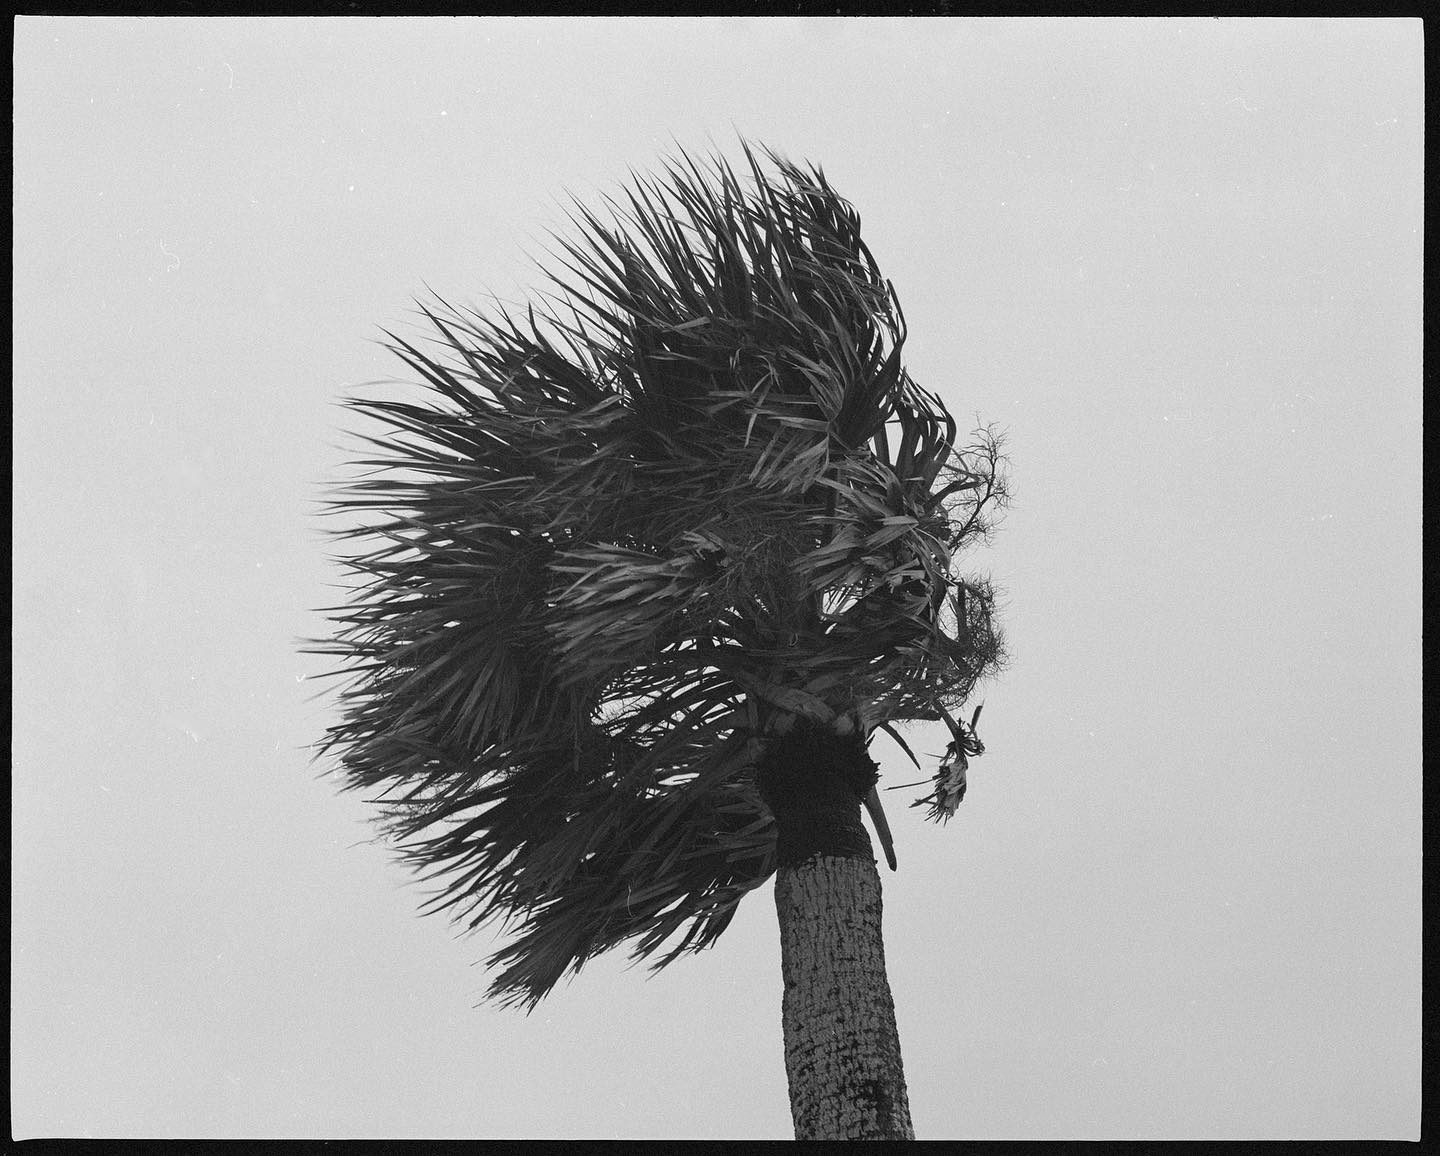 Palm tree swaying in the breeze.

It was very windy when we were in Marineland, a half hour or so south of St. Augustine. Shot with my #pentax67 with the 165mm lens on Bergger Panchro 400. 
#rollfilmweek #rollfilmweek2020 #film #filmphotography #filmphotographic #istillshootfilm